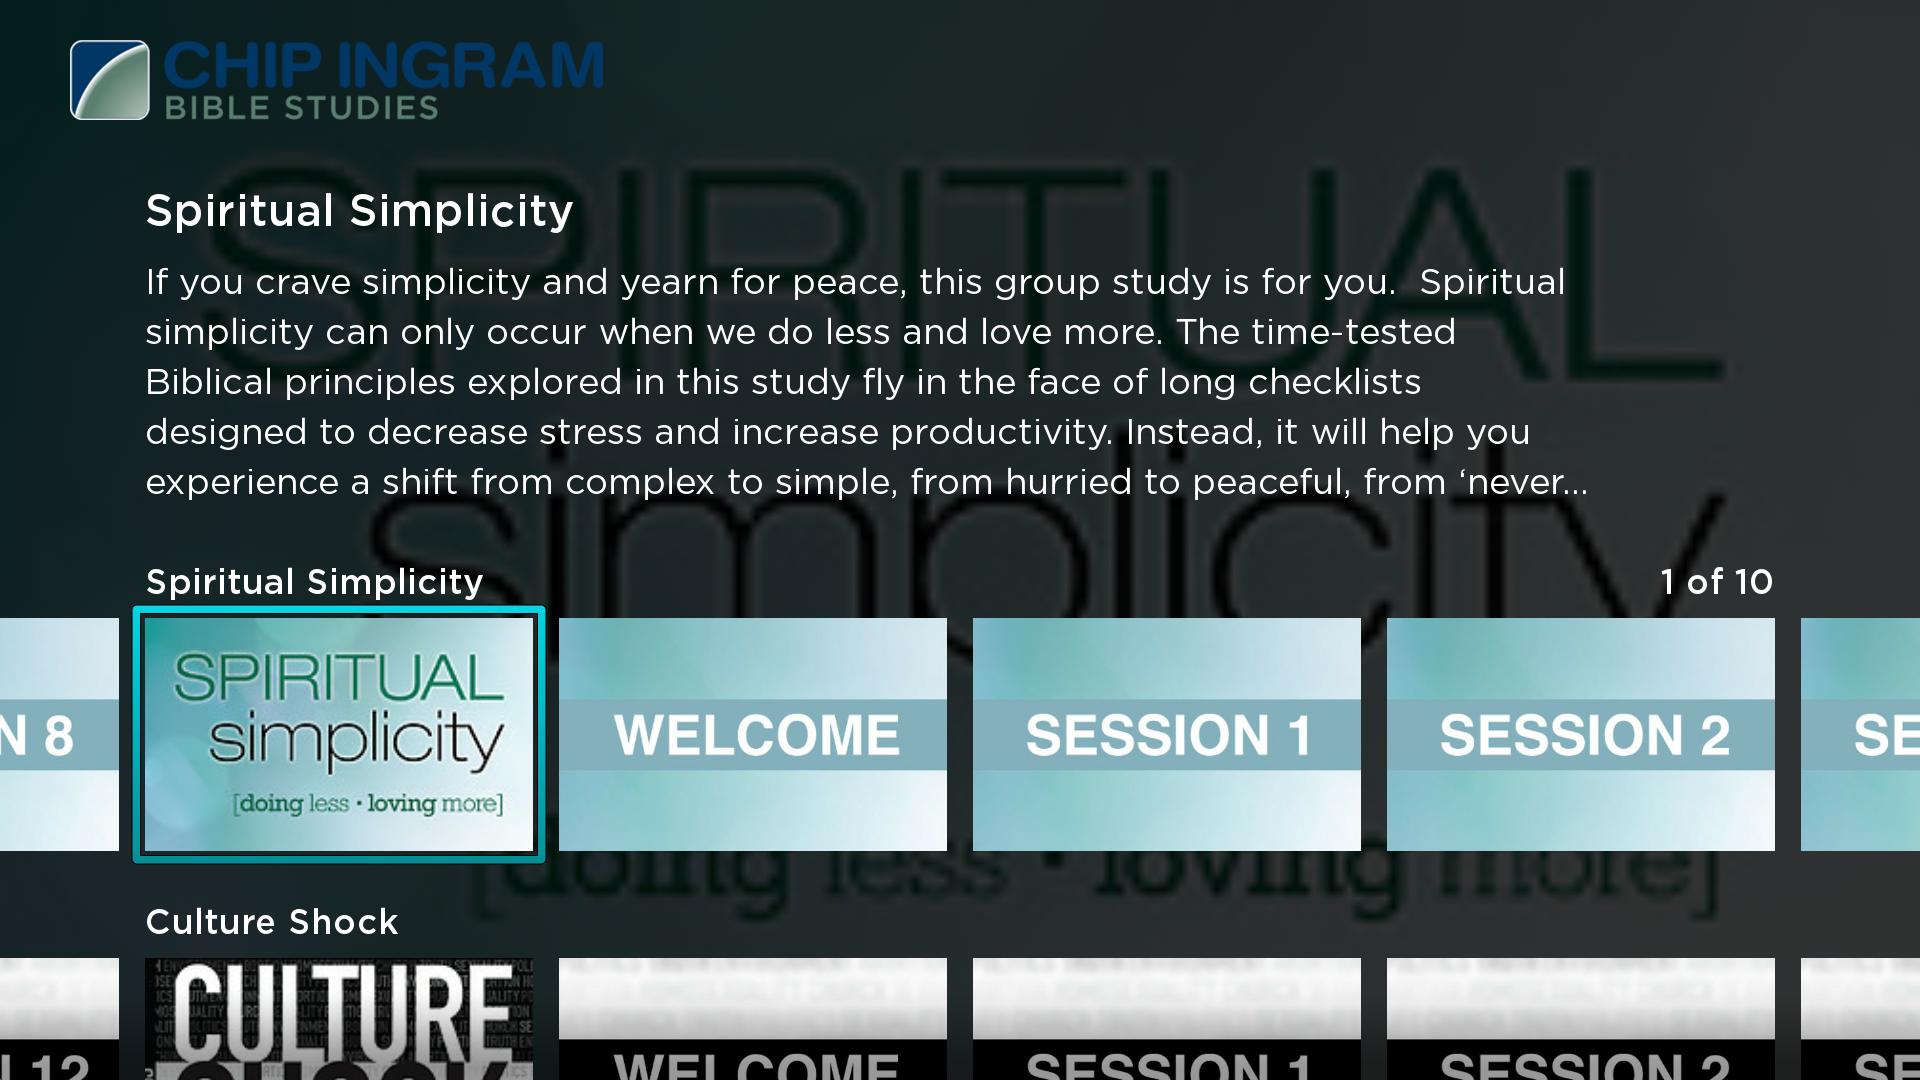 Screenshot of a page titled "Chip Ingram Bible Studies" listing sessions of available videos 